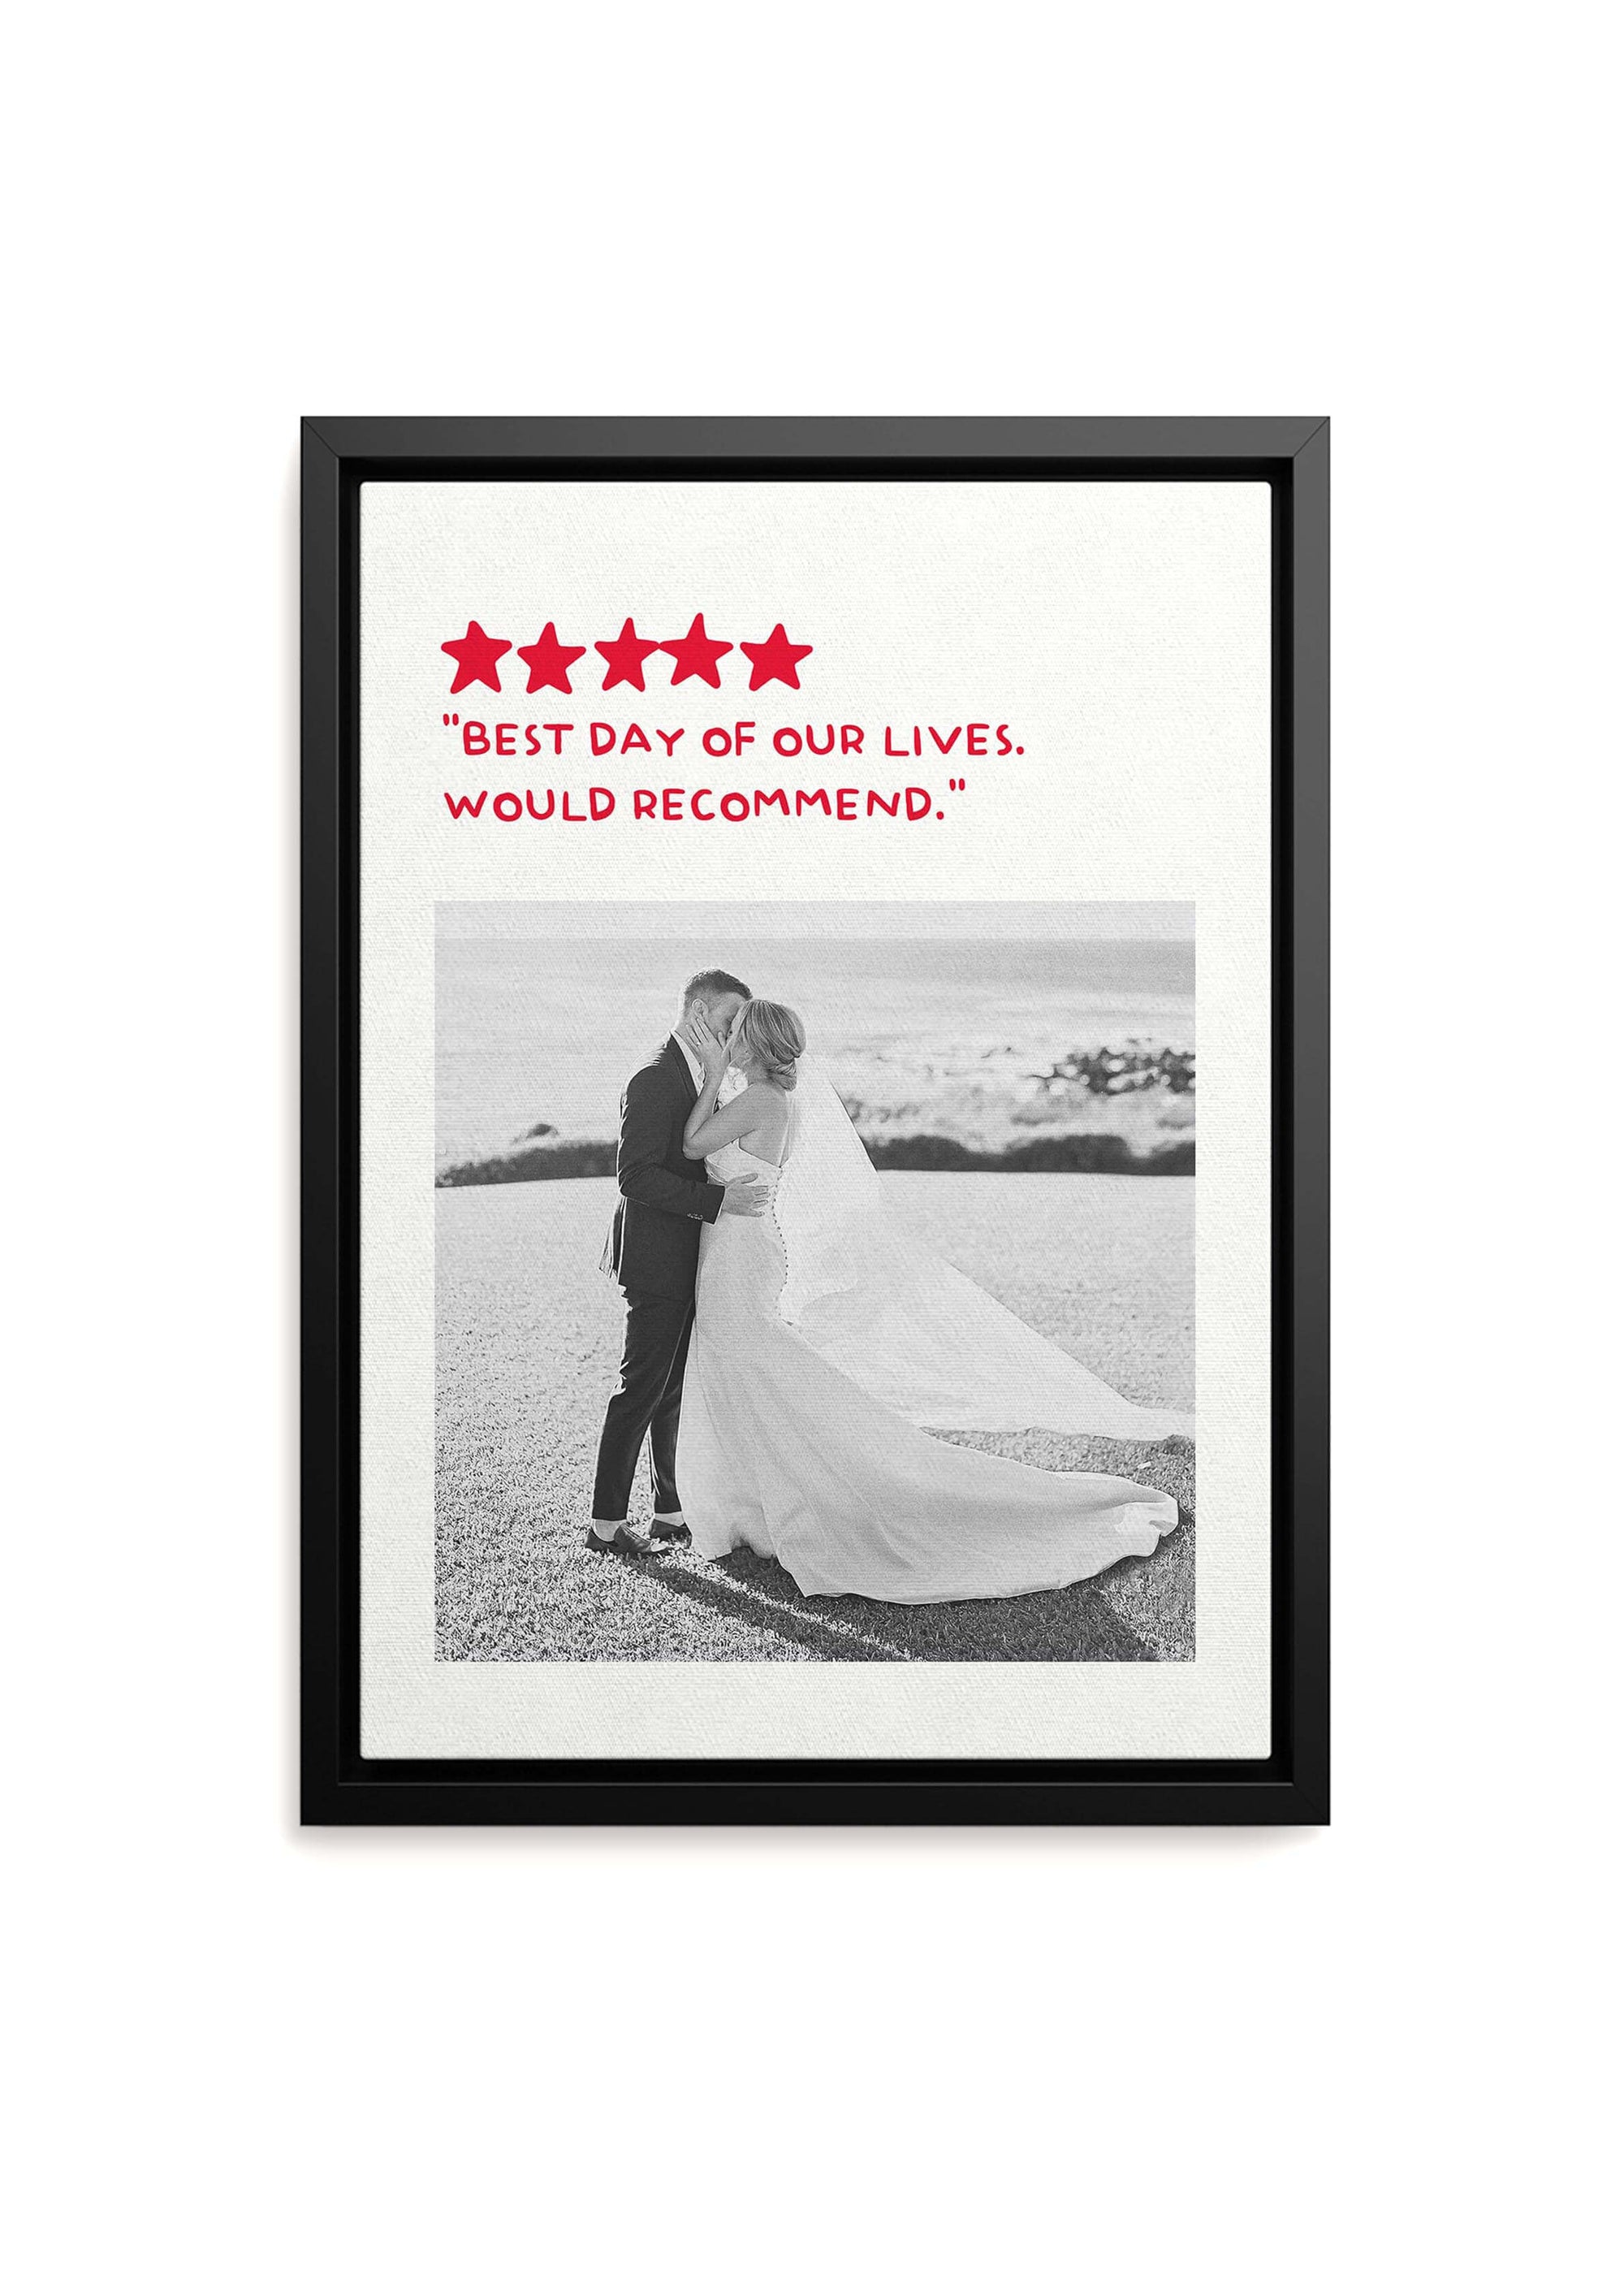 Personalized anniversary gift with photo of couple on their wedding day turned into black and white on black framed canvas with a custom humorous review added. Canvas is on white background.